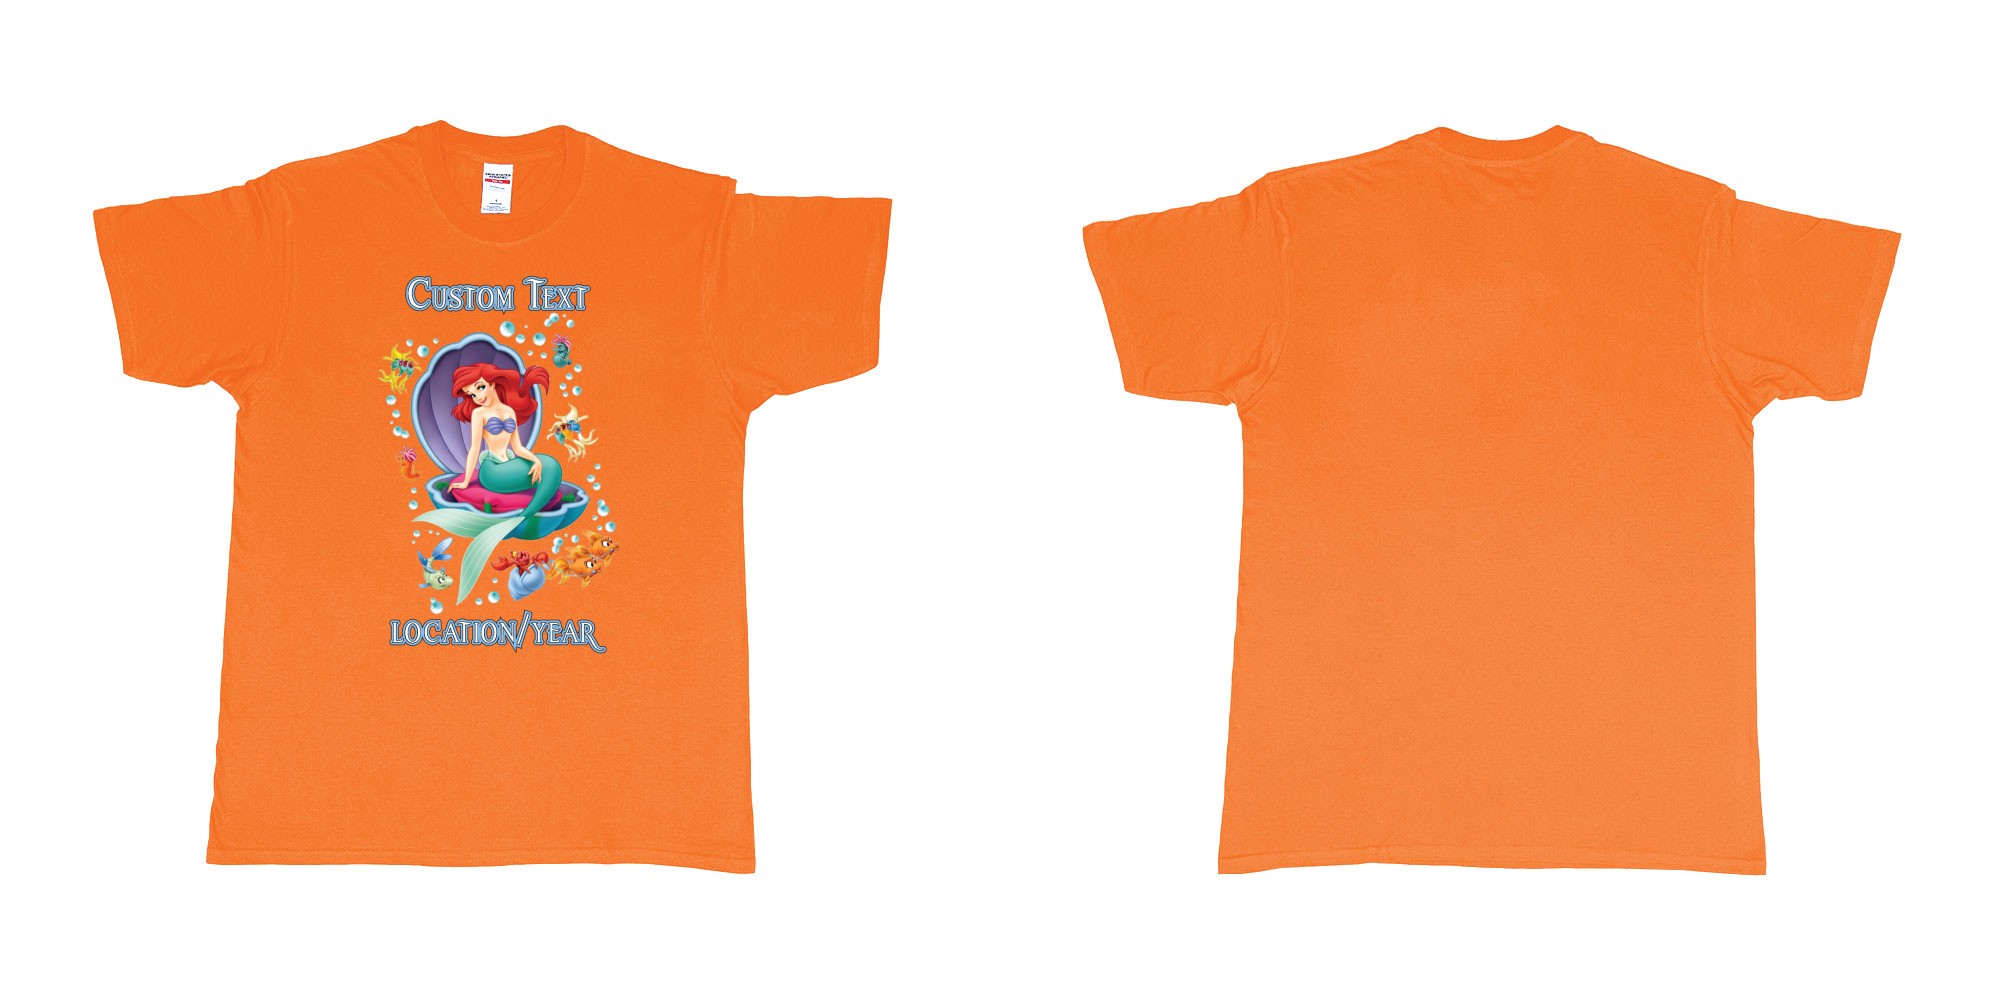 Custom tshirt design little mermaid shell birthday in fabric color orange choice your own text made in Bali by The Pirate Way